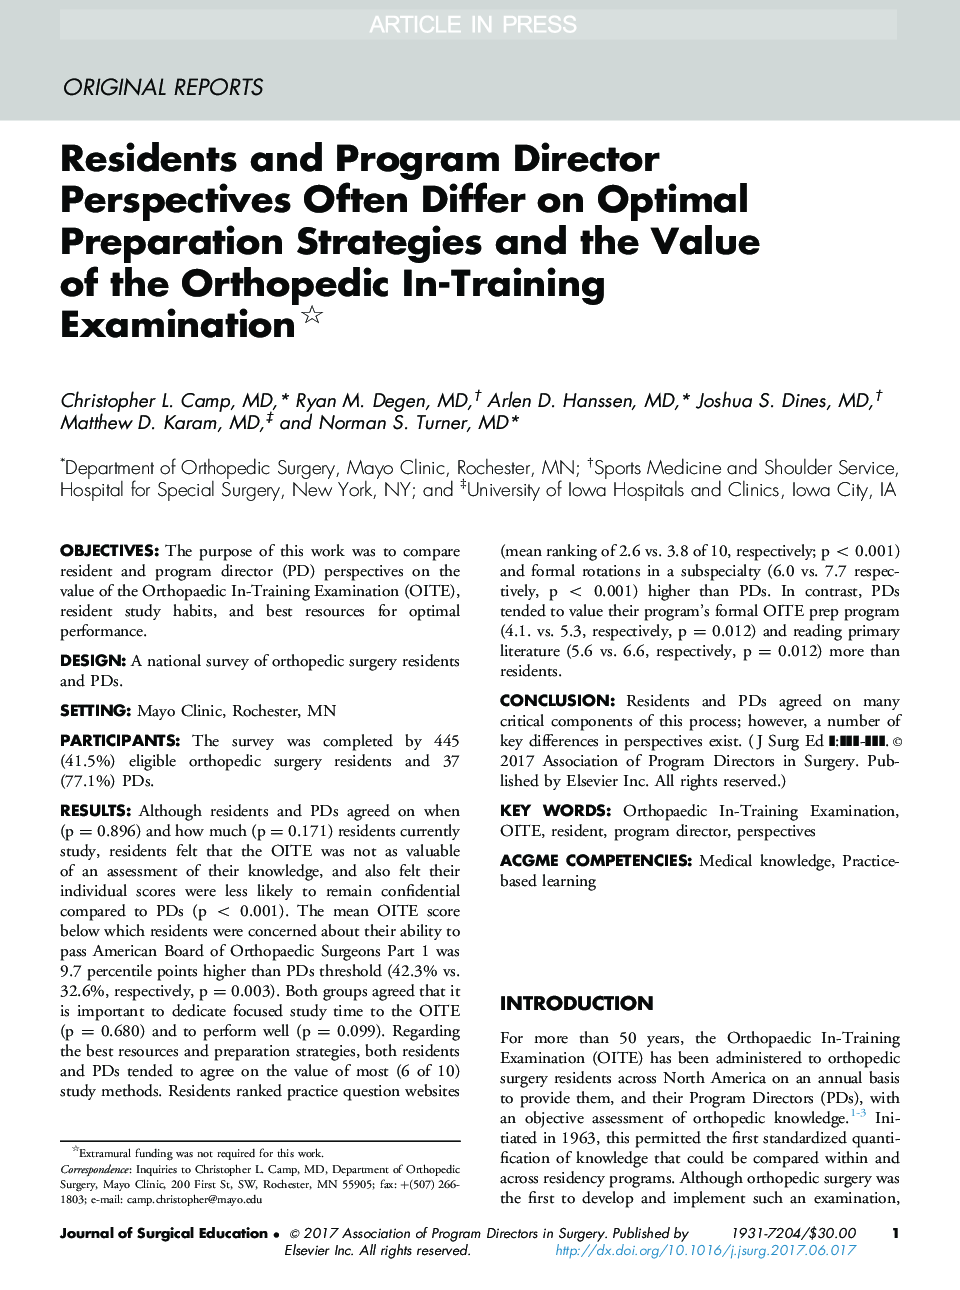 Residents and Program Director Perspectives Often Differ on Optimal Preparation Strategies and the Value of the Orthopedic In-Training Examination